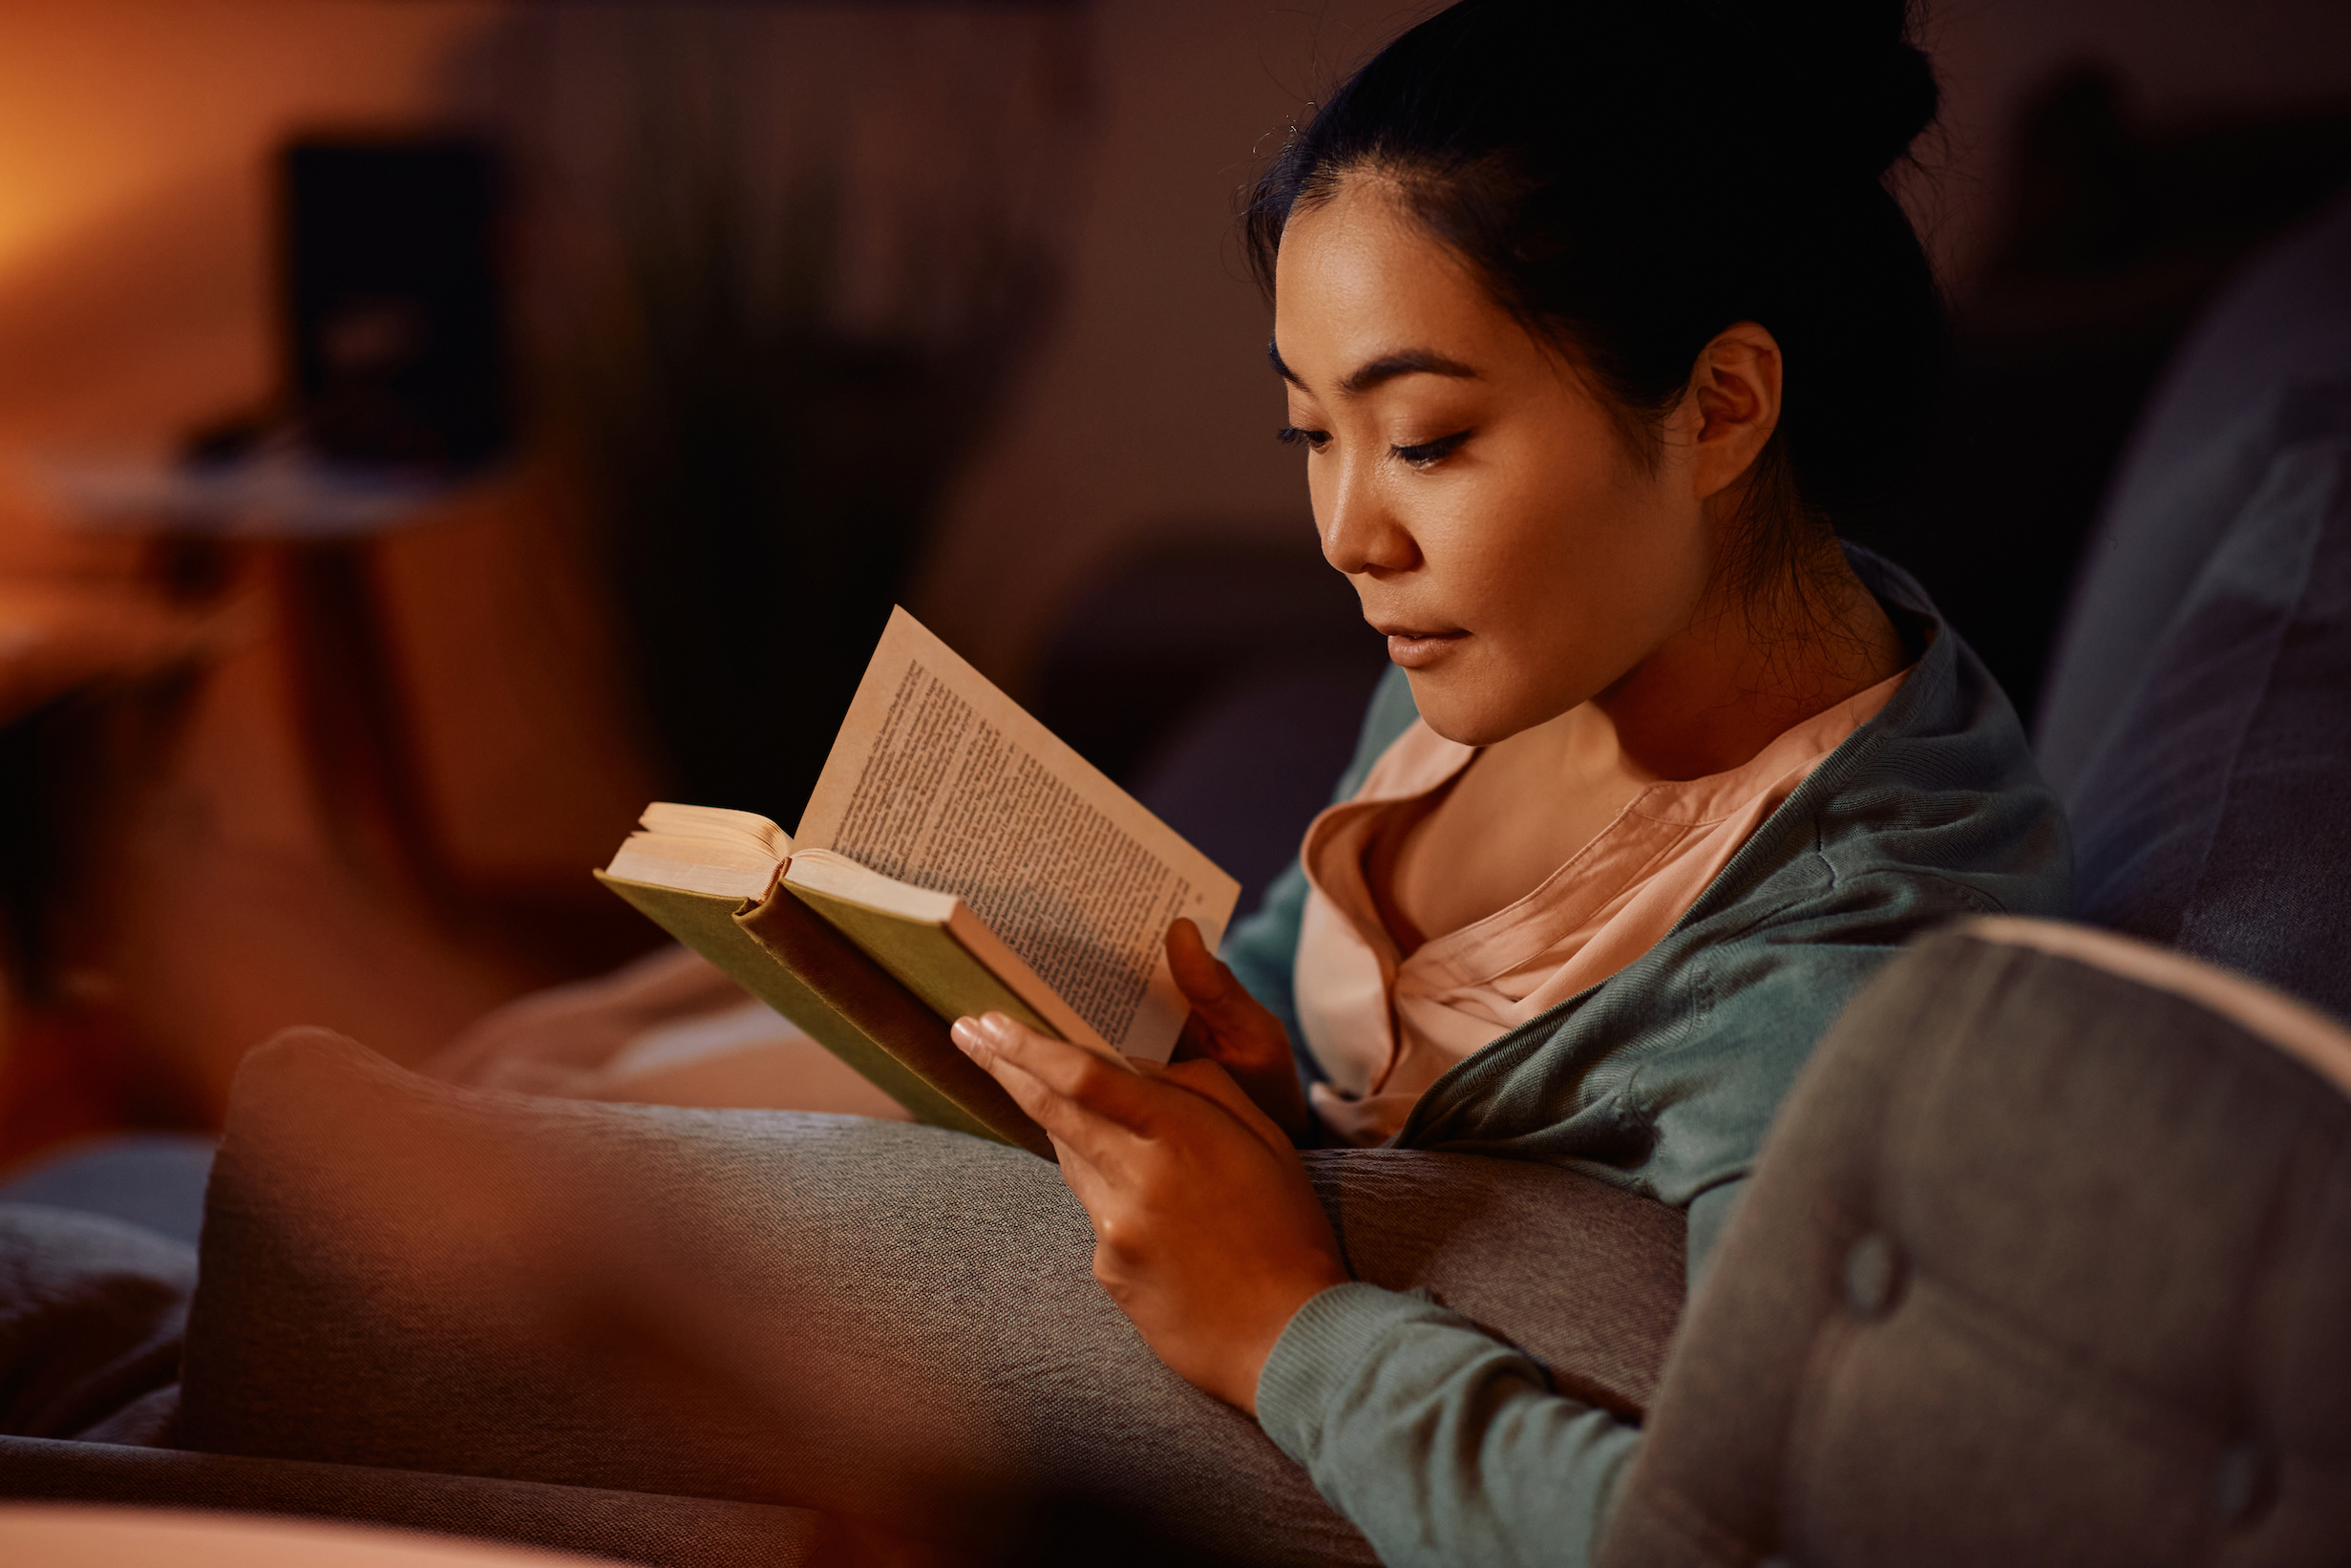 Woman reading a book at night in a dimly lit room.